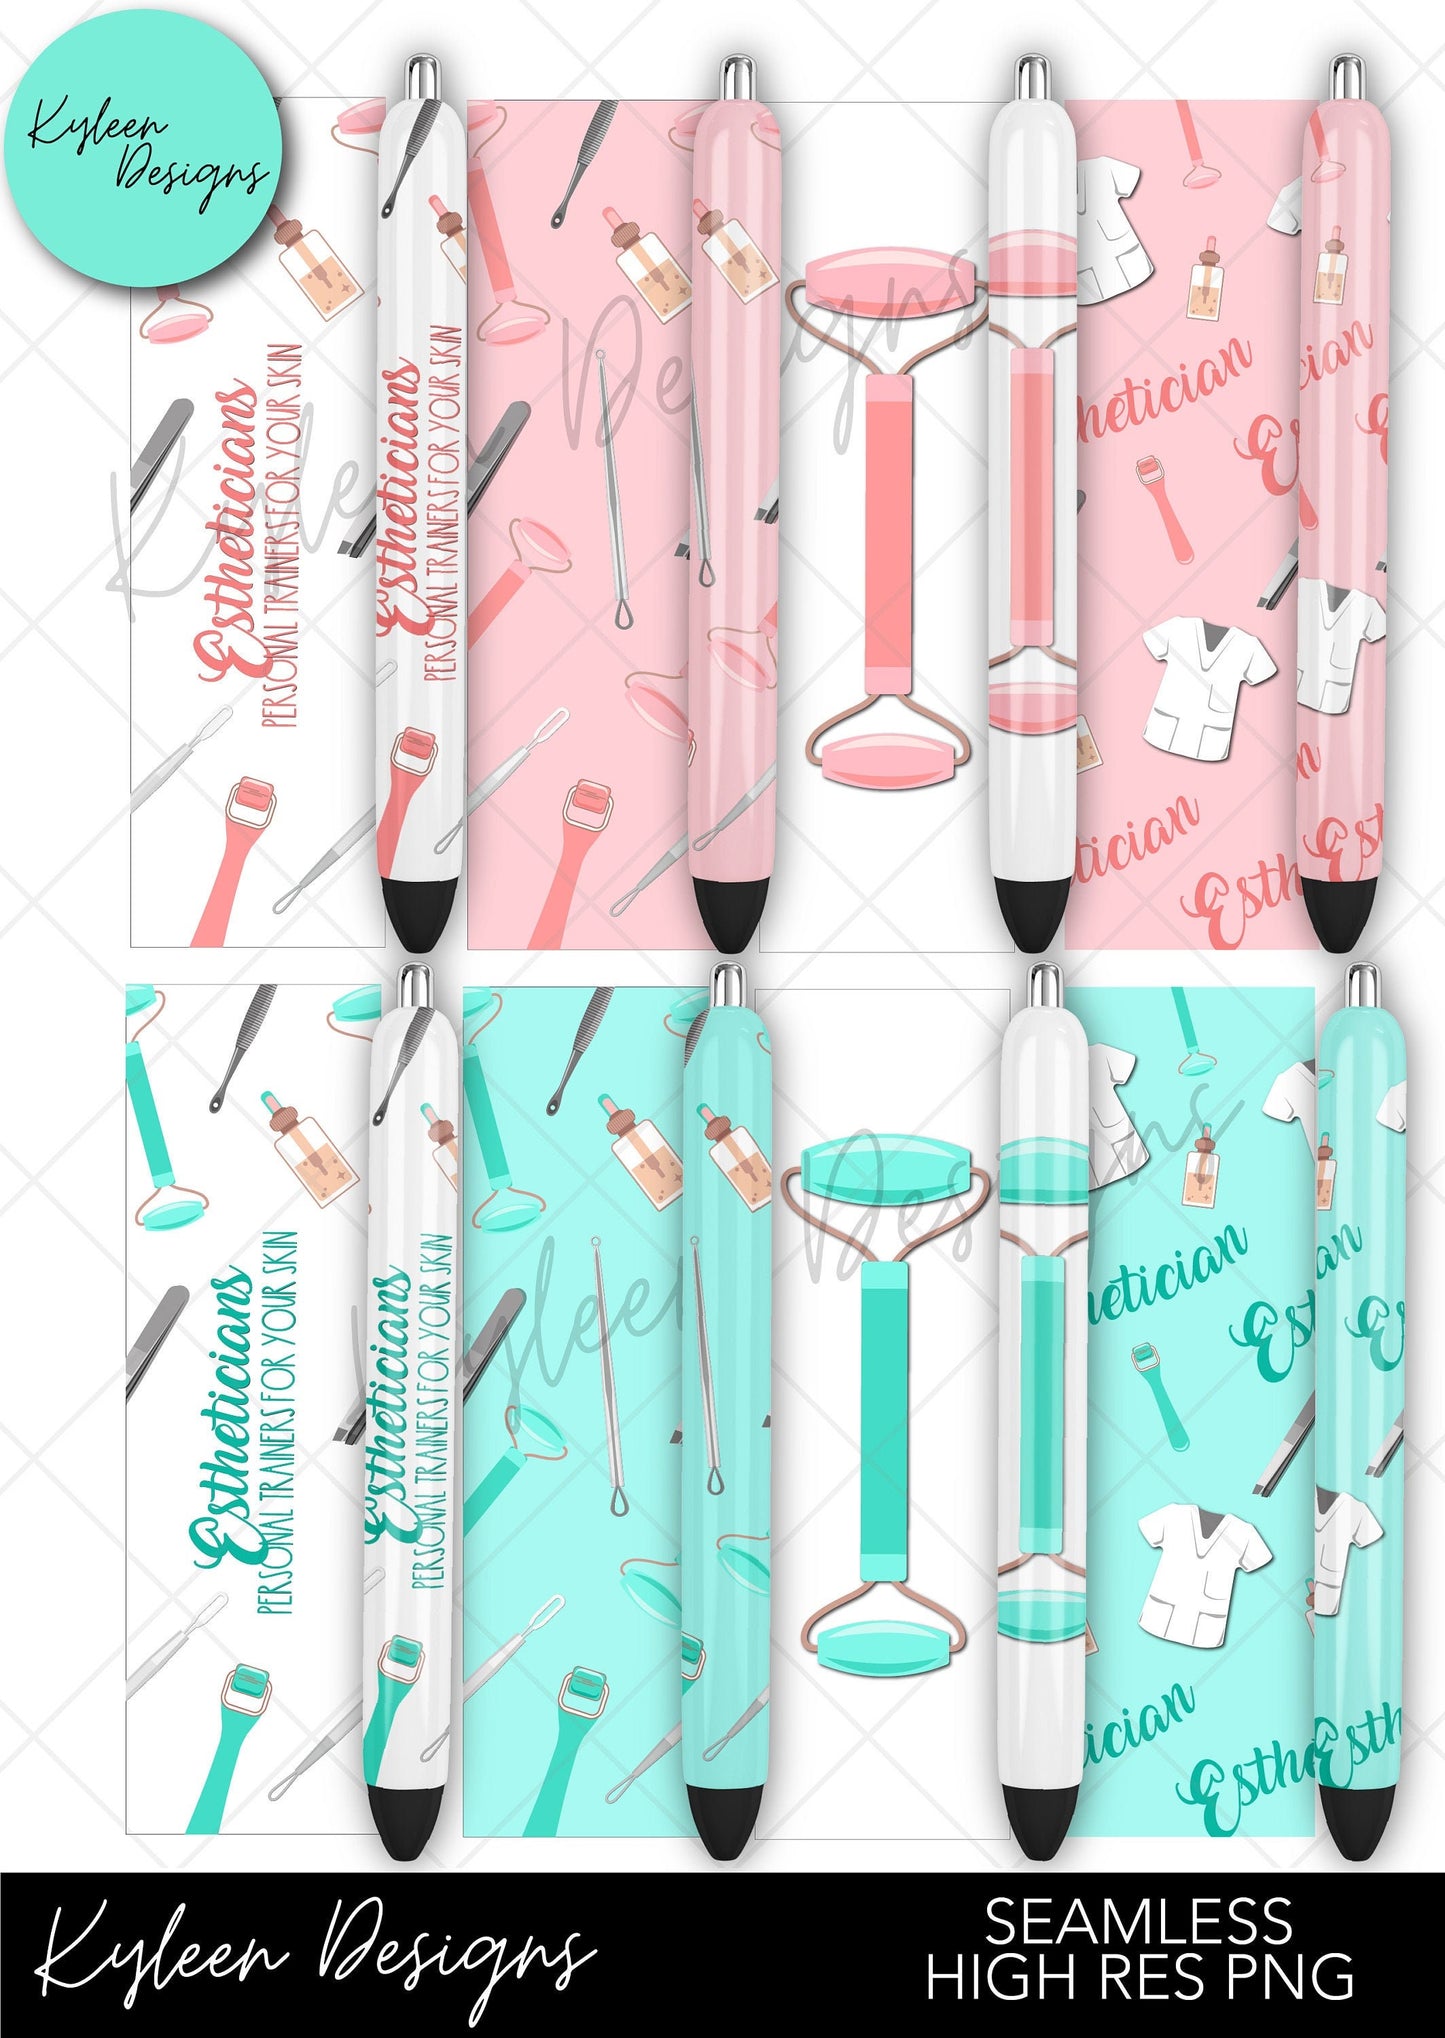 Esthetician Pen Wraps For Waterslide, Sublimation or Vinyl High RES PNG SEAMLESS